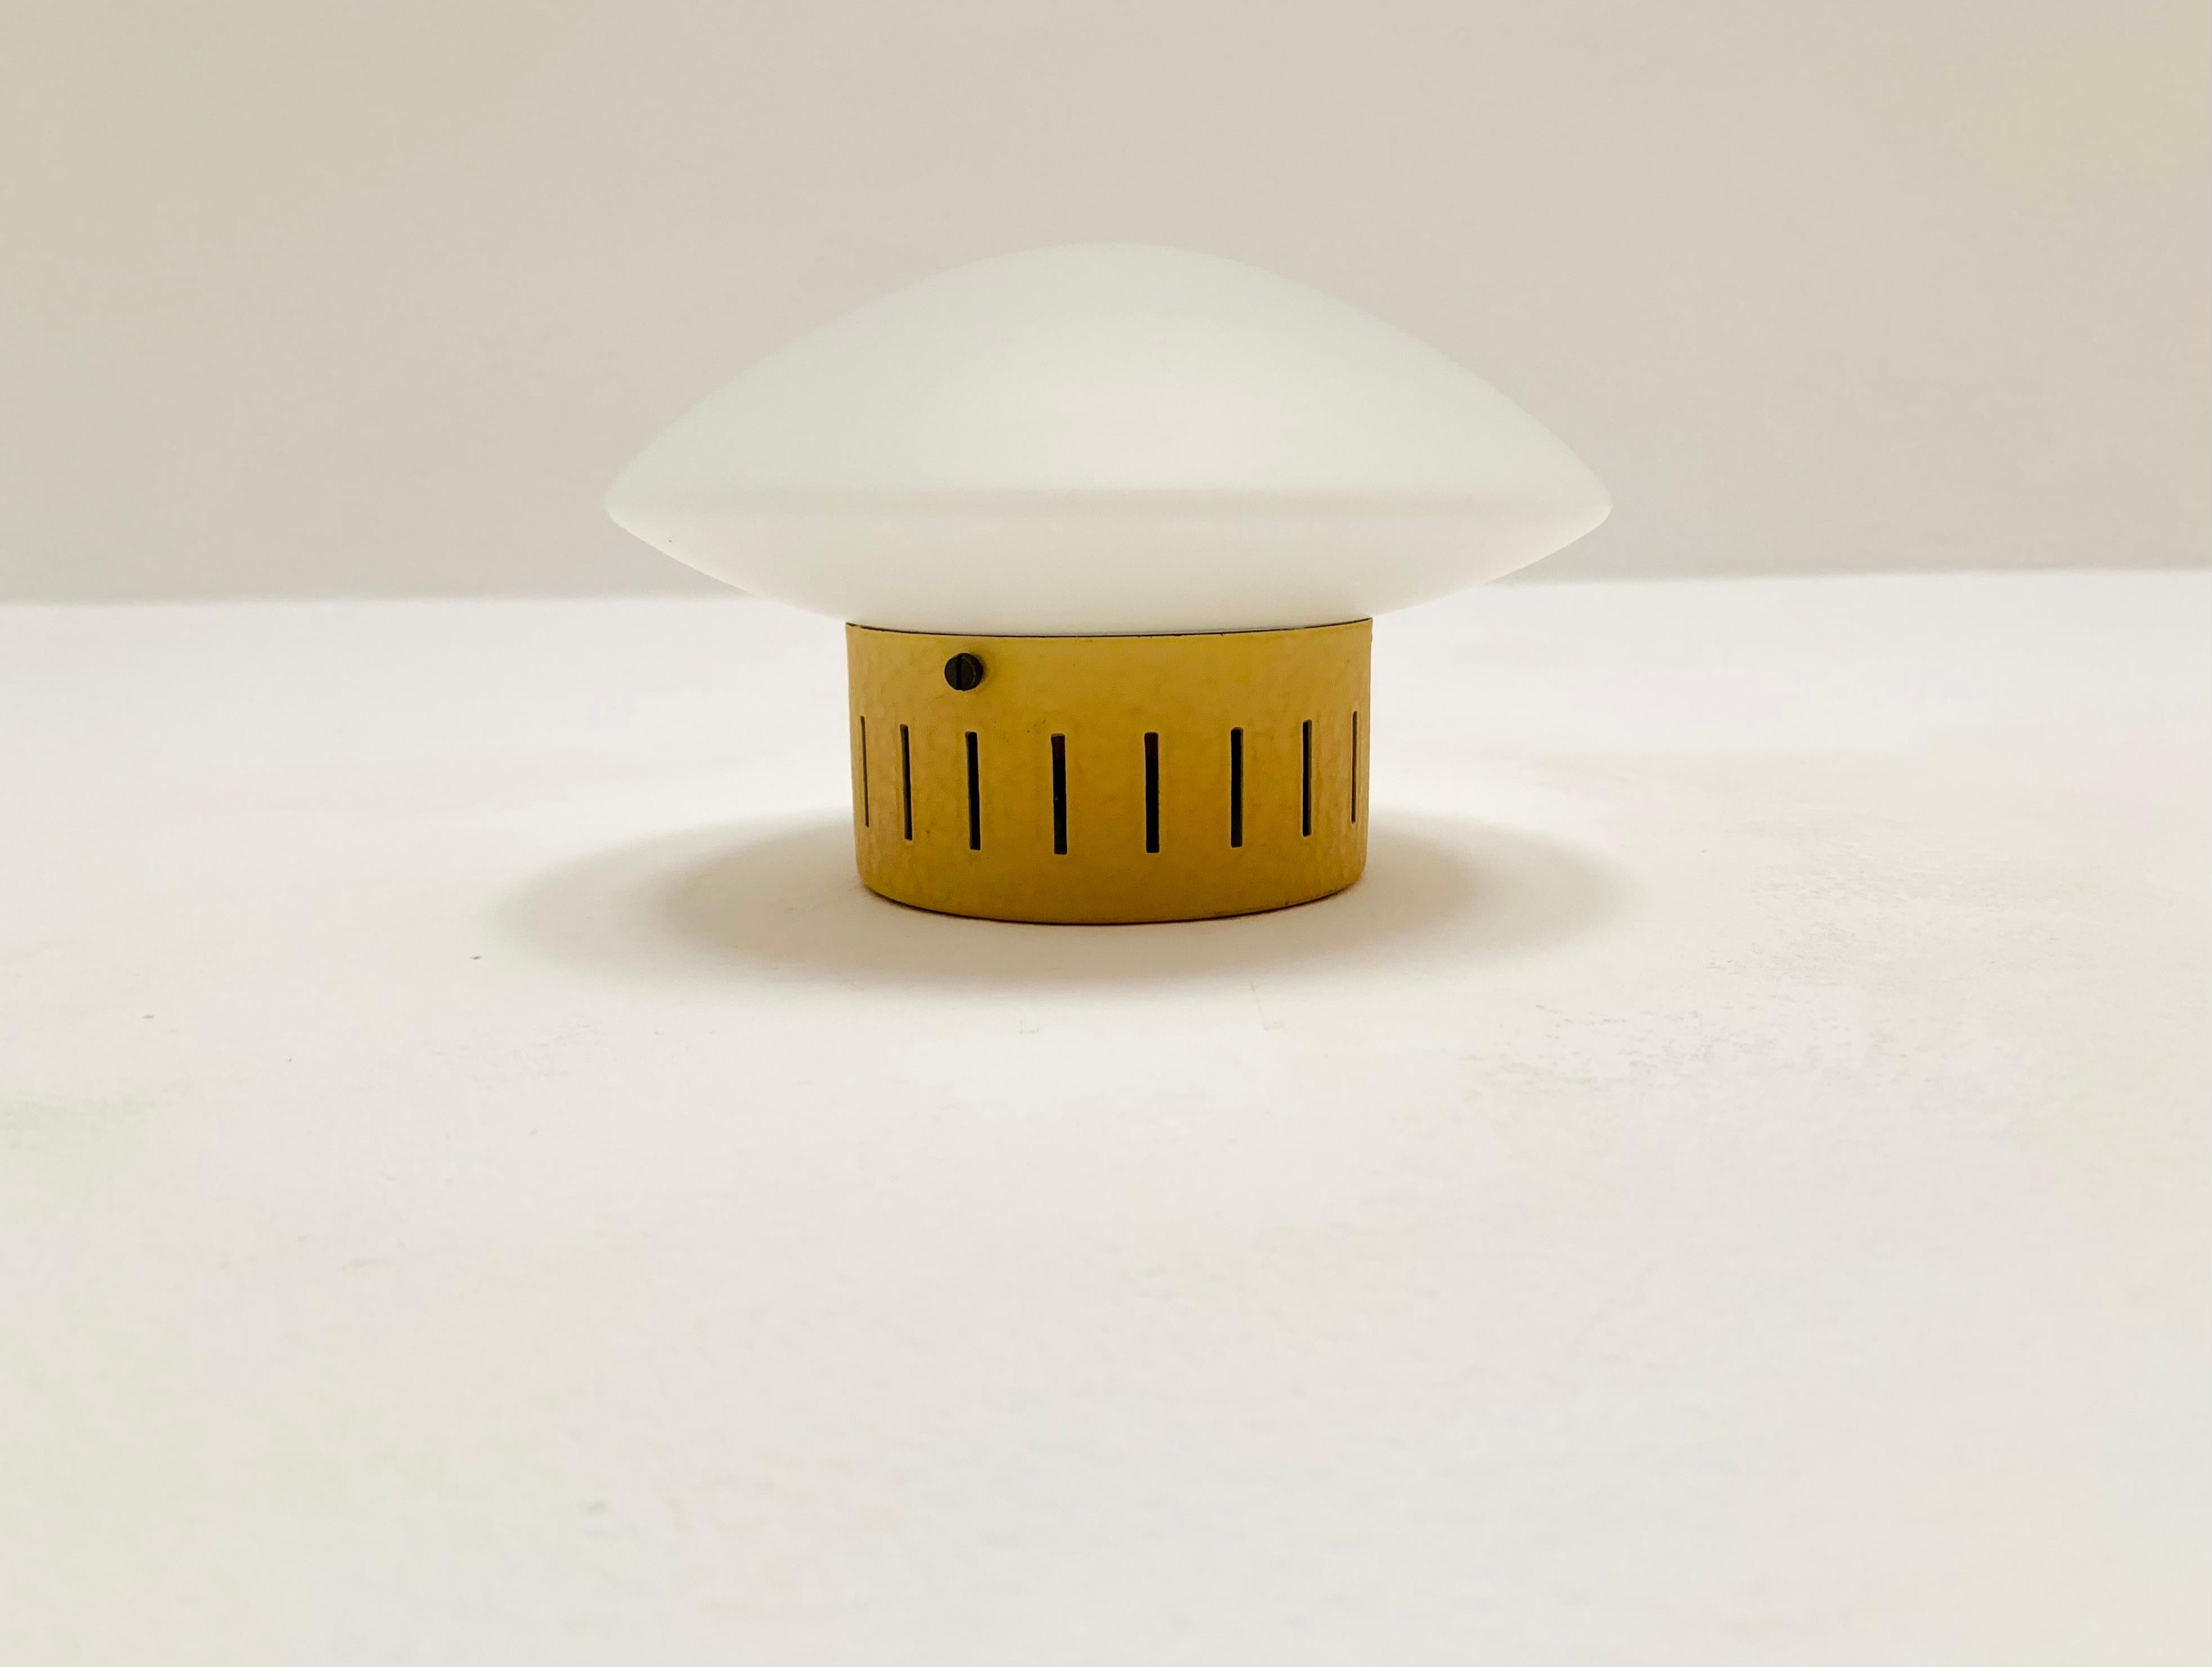 Very nice opal glass wall lamp or ceiling lamp from the 1950s.
Very elegant and classic shape.
The slits in the yellow holder create a wonderful play of light.

Condition:

Very good vintage condition with slight signs of wear consistent with